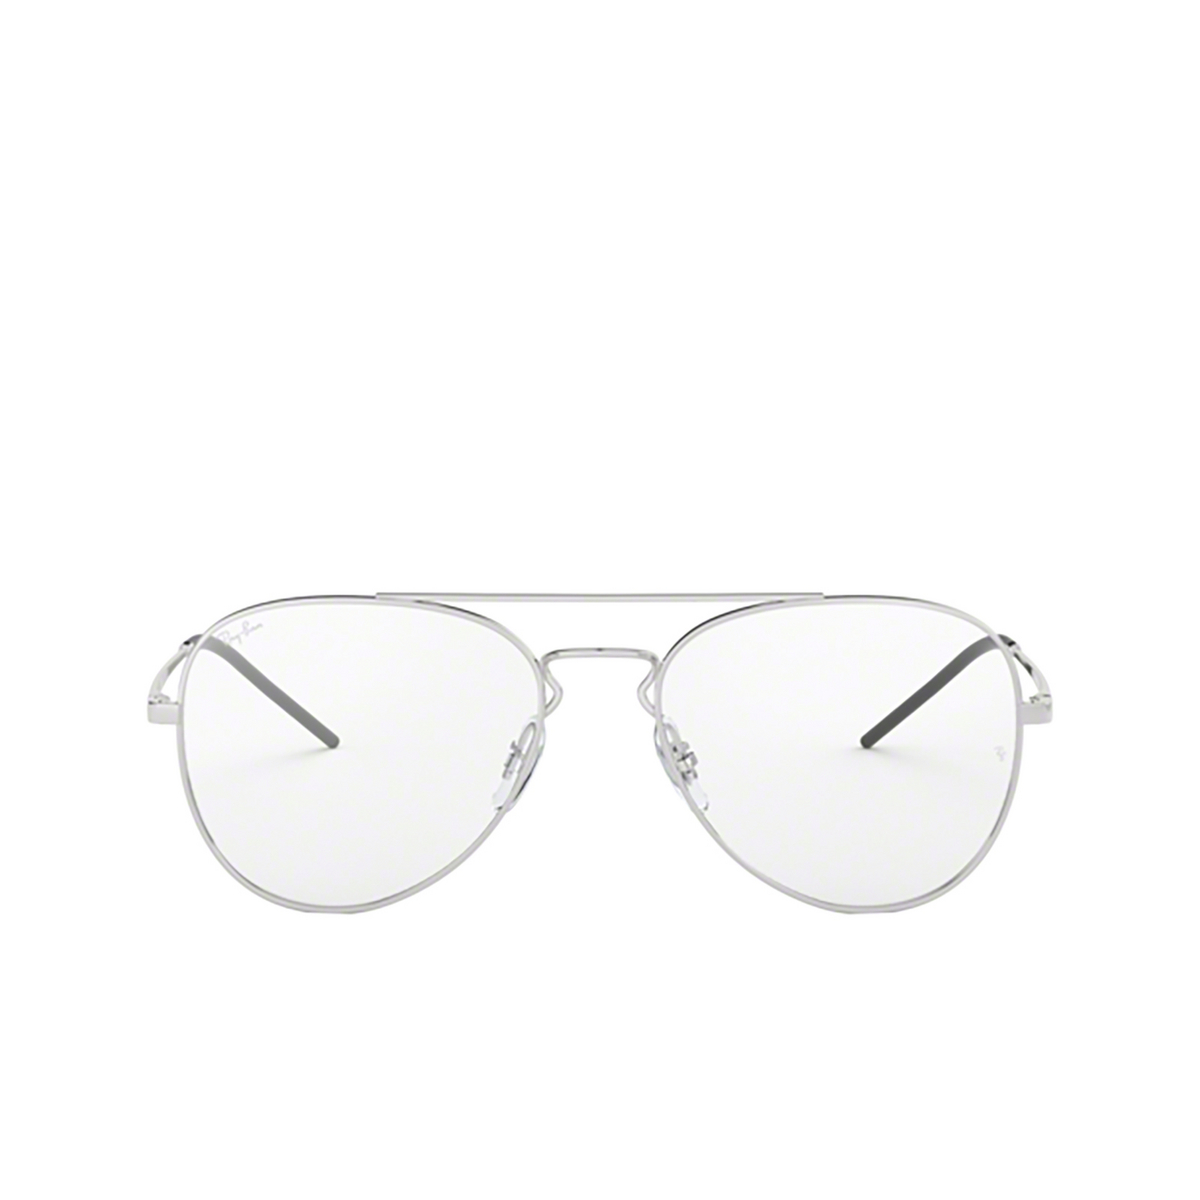 Ray-Ban® Aviator Eyeglasses: RX6413 color Silver 2501 - front view.